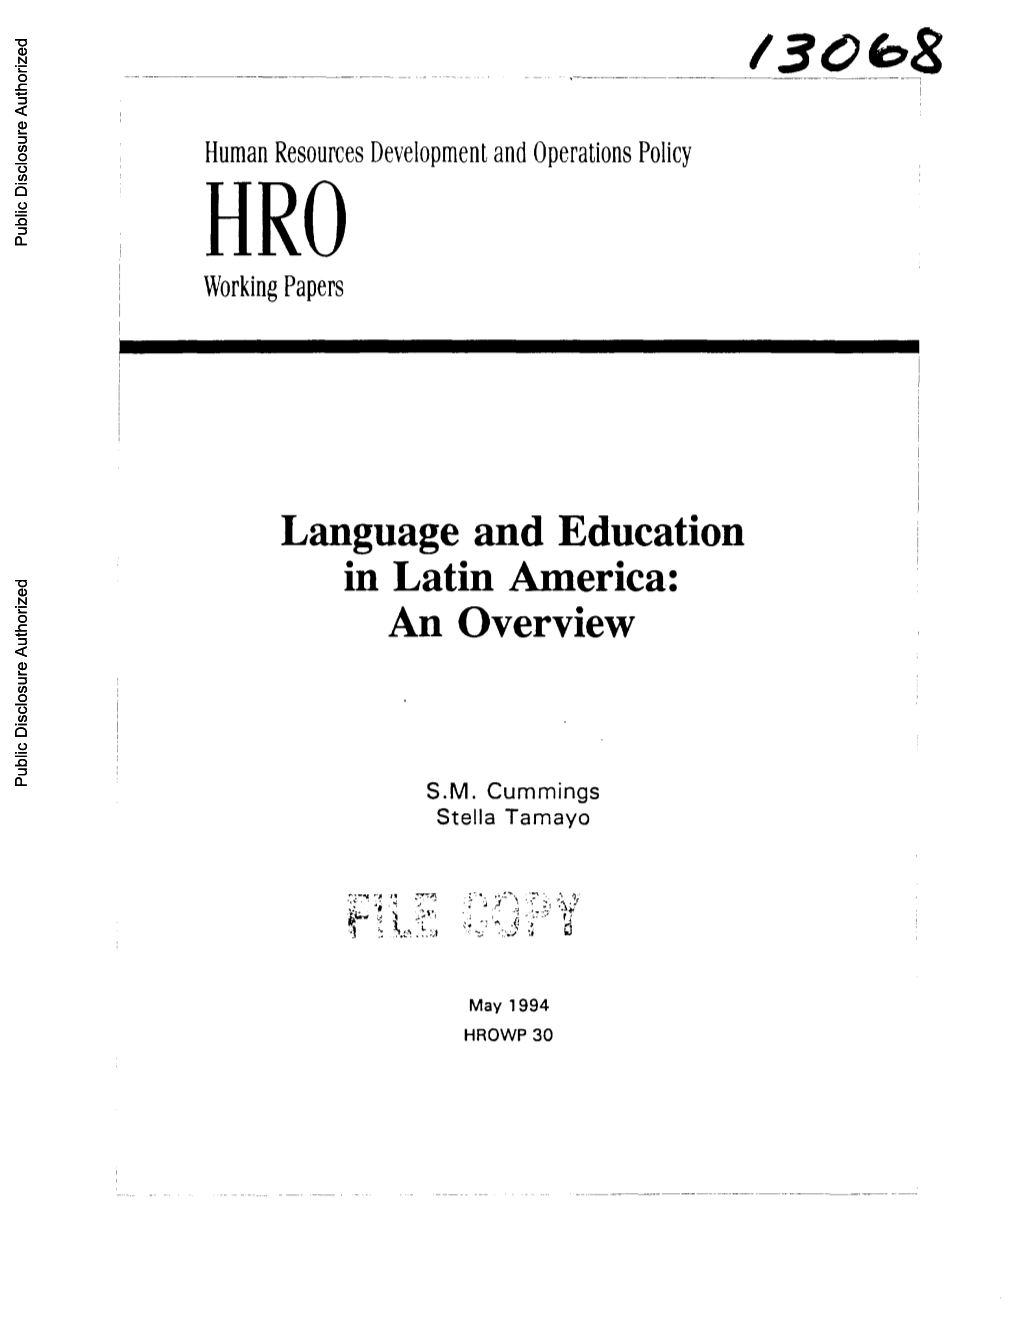 Language and Education in Latin America: an Overview